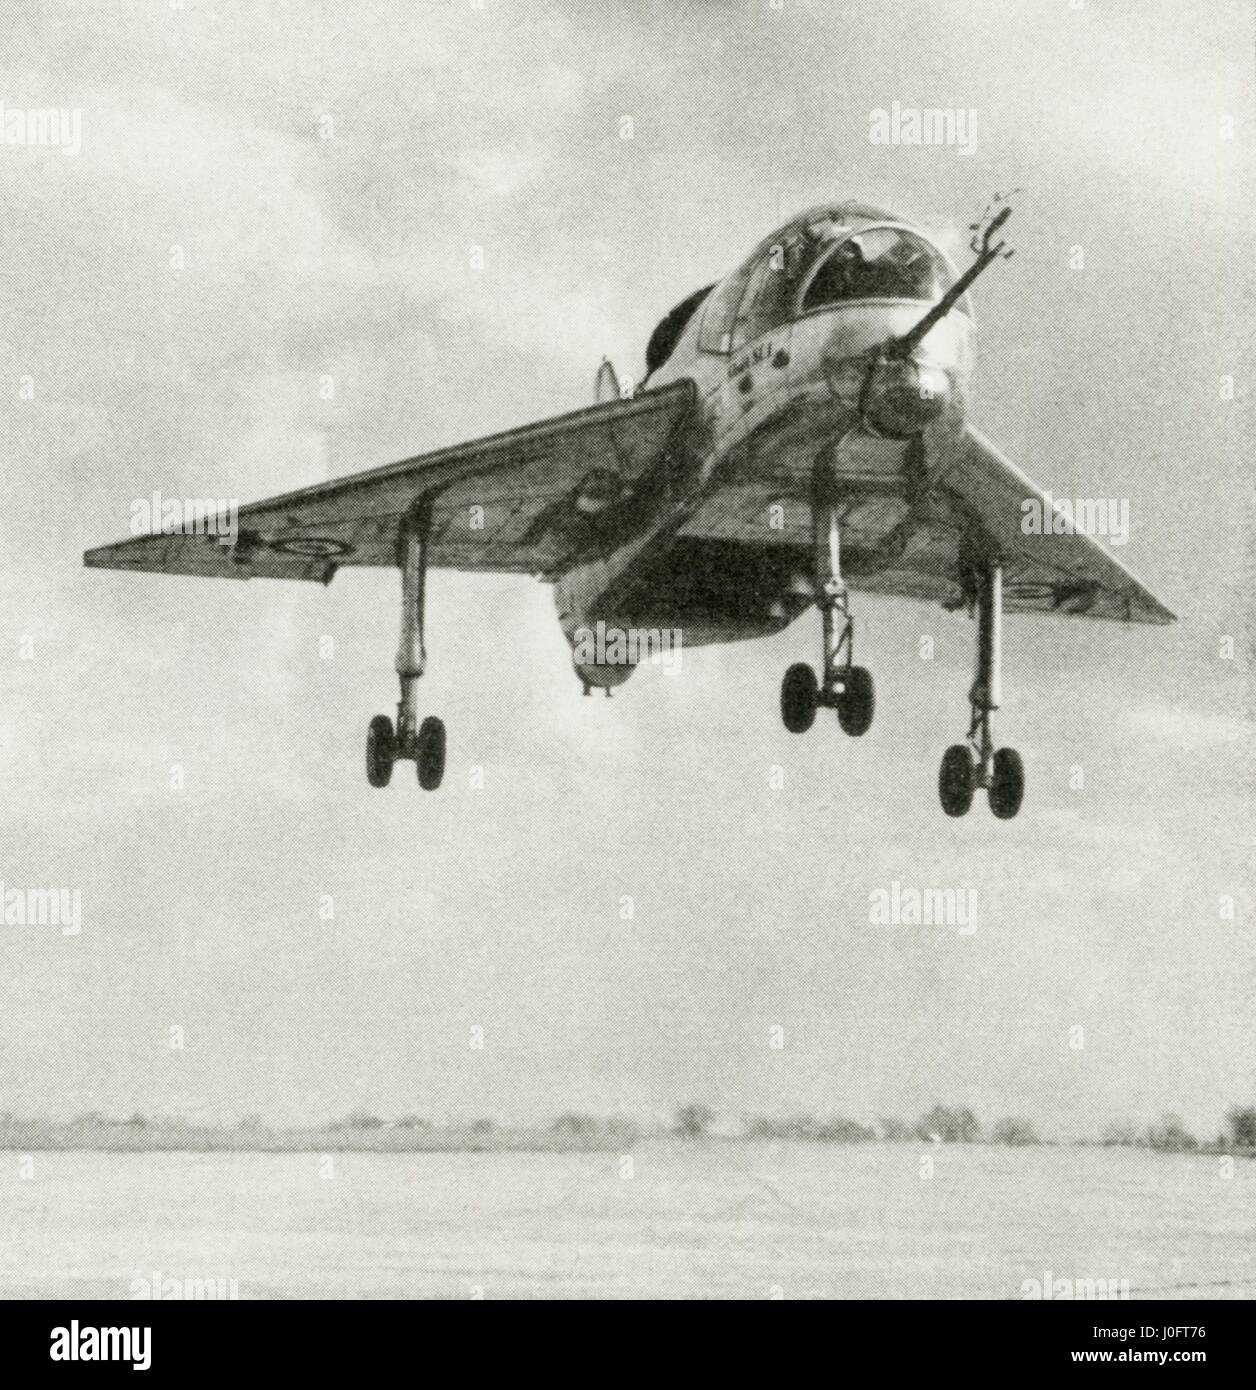 Short SC.1 VTOL research aircraft making a transition from hovering to forward flight Stock Photo